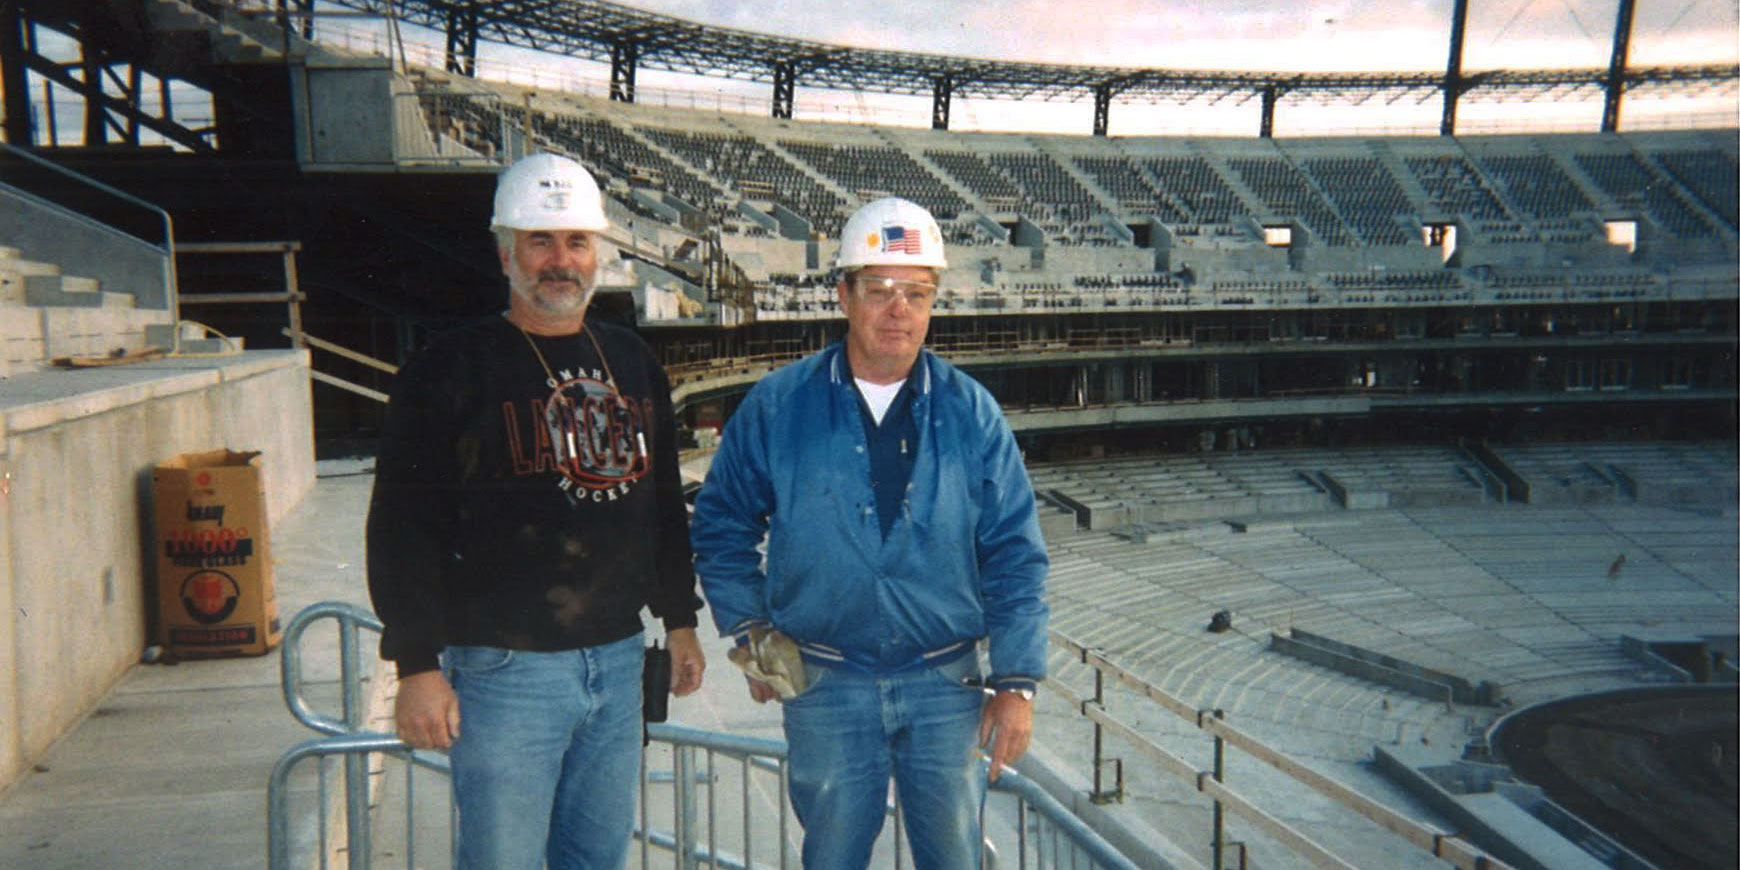 Image of two members in a stadium